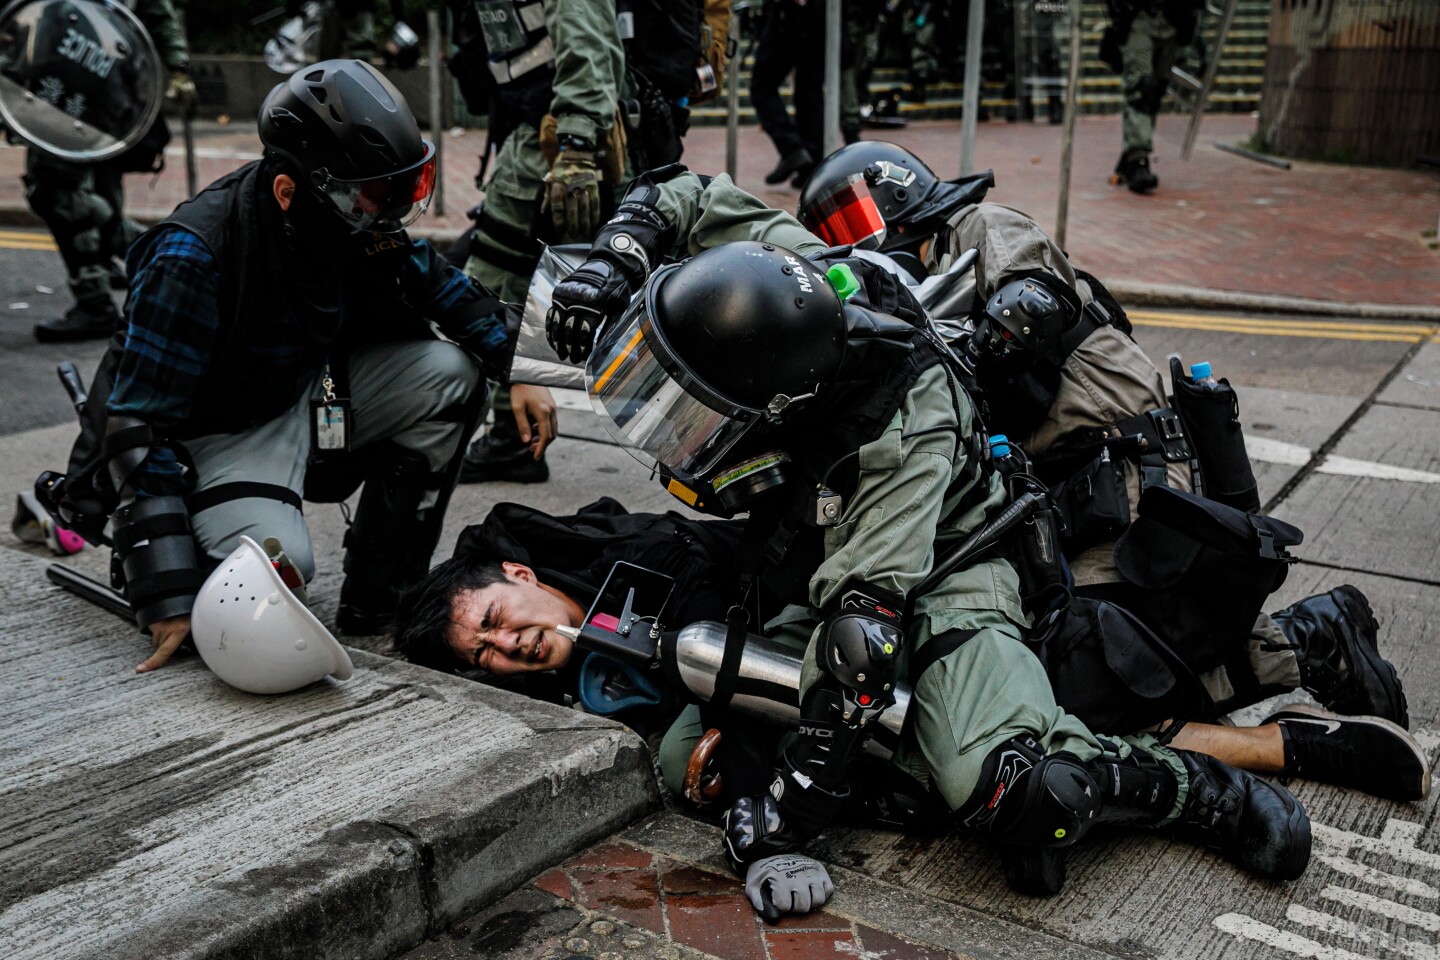 HONG KONG, CHINA -- SUNDAY, SEPTEMBER 29, 2019: Police officers in riot gear pin down a young protester as they confront demonstrators with tear gas, batons and shields and make mass arrests near the HK Police Headquarters as chaos grips the city leading up to ChinaÕs National Day this week, in Hong Kong, on Sept. 29, 2019. Despite Chief Executive Carrie LamÕs bowing to the demonstratorsÕ key demand Ð withdrawal of a controversial extradition bill, pro-democracy demonstrators are now calling for Lam to immediately meet the rest of their demands. This includes an independent inquiry into policeÕs use of force, amnesty for those arrested, a halt on the use of the word ÒRiotÓ when describing the rallies, and lastly, calls for universal suffrage for the people of Hong Kong. (Marcus Yam / Los Angeles Times)